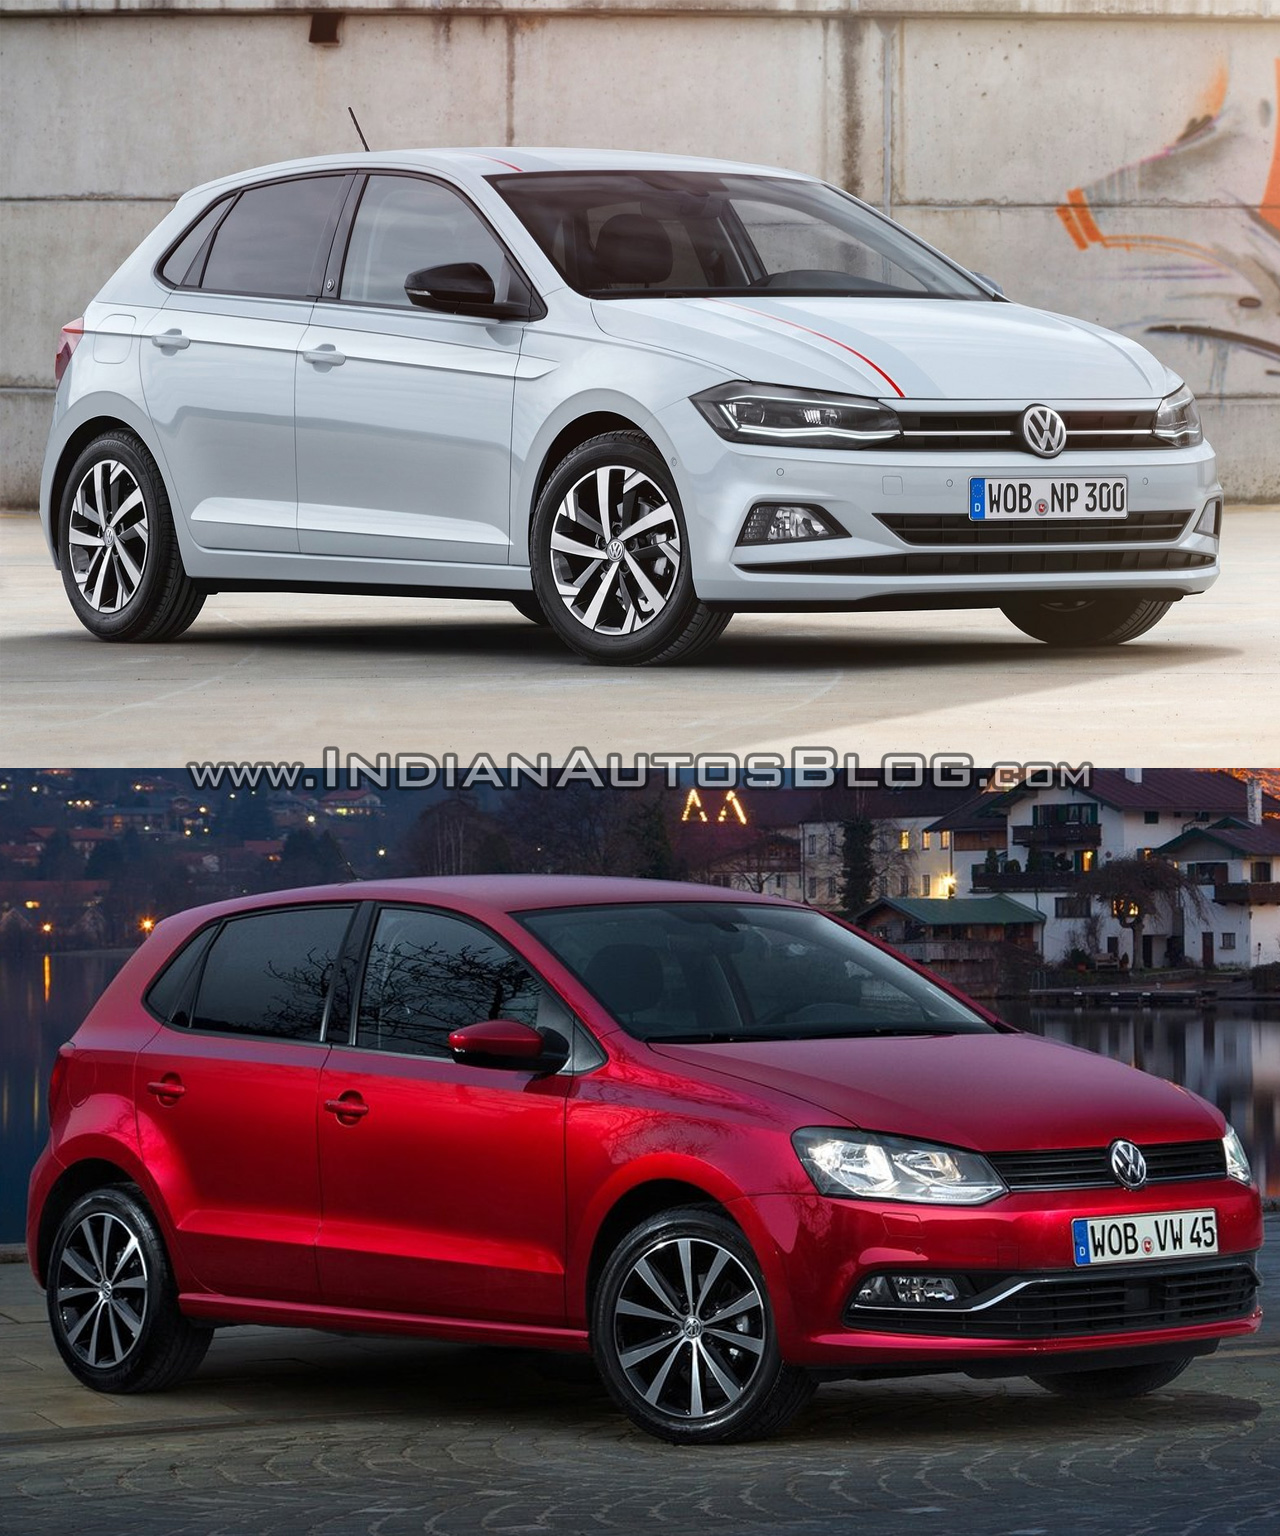 2017 VW Polo vs. 2014 - Old New